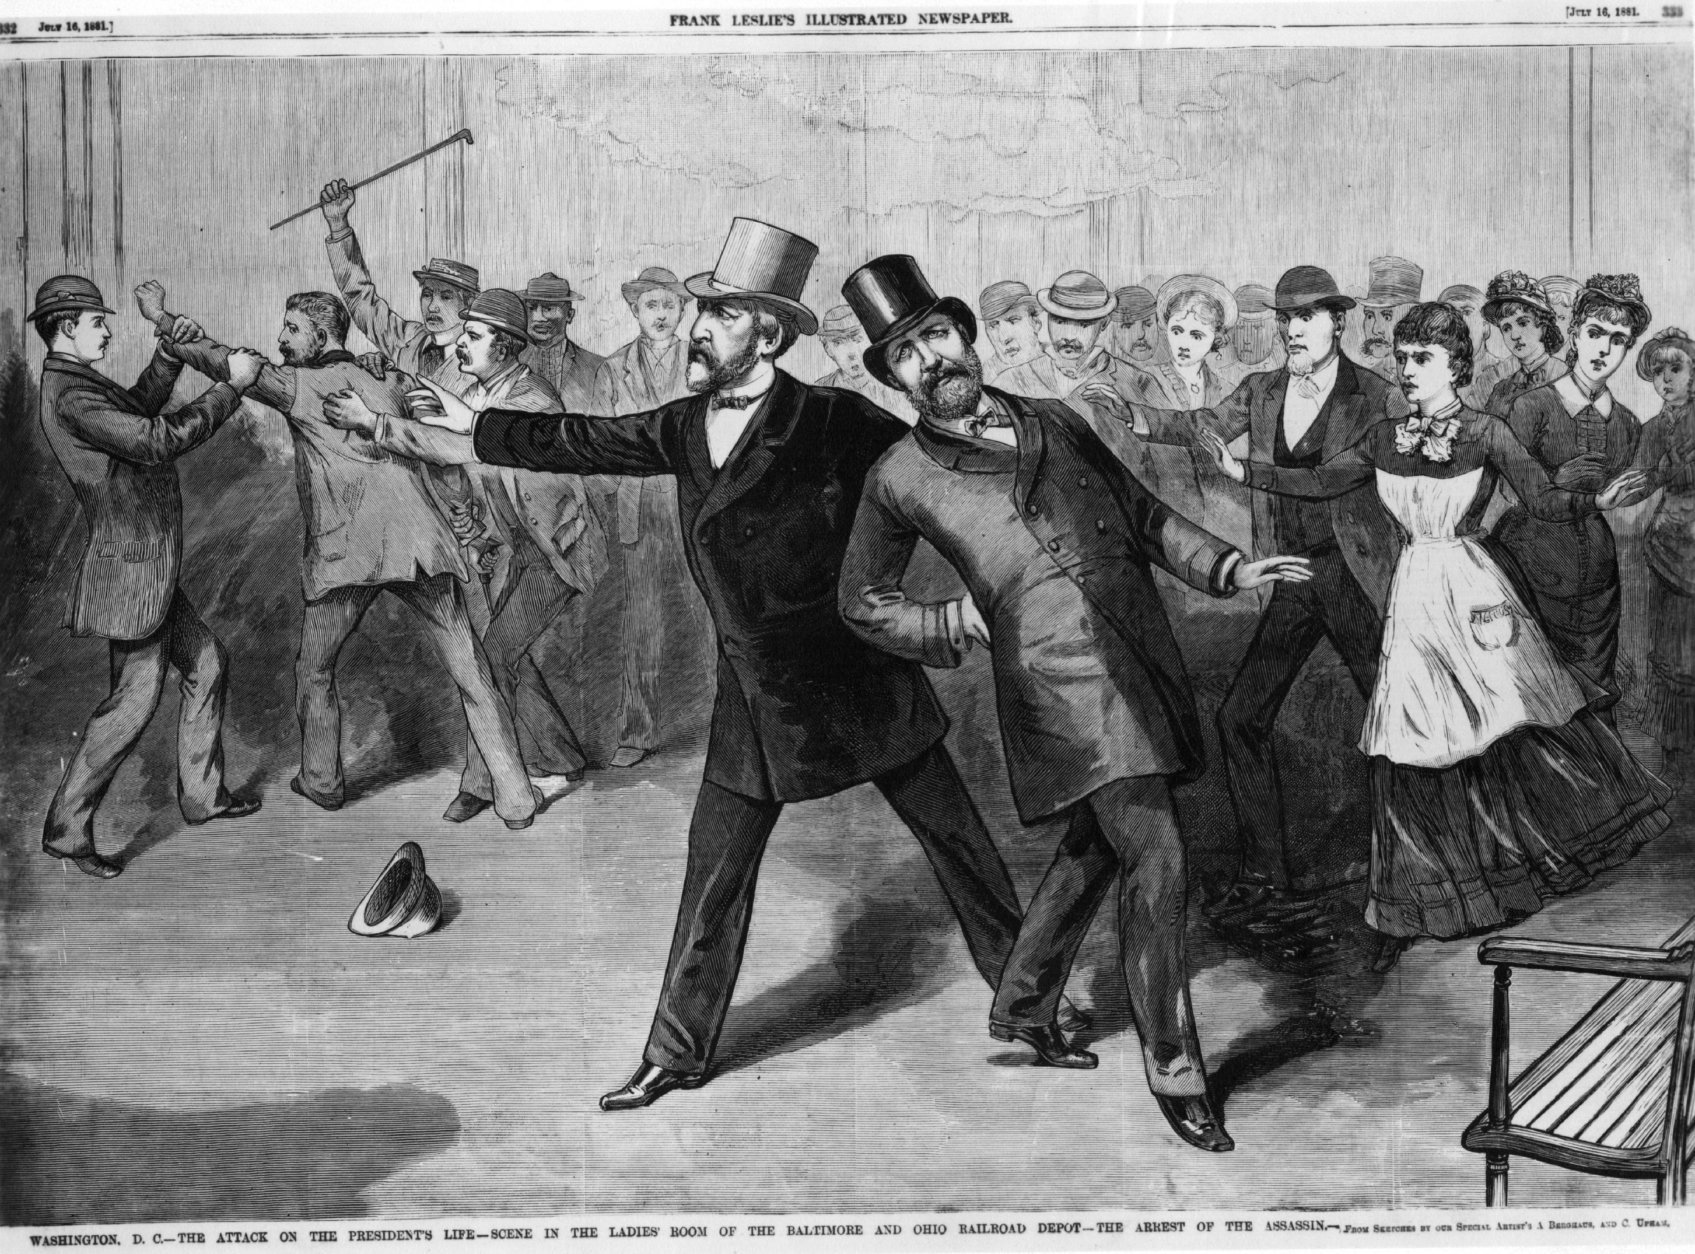 James Abram Garfield (1831 - 1881) 20th President of the United States being assassinated at Baltimore Station, Ohio. Following his support of civil service reform he was shot by Charles Guiteau, a disappointed office seeker.  Original Publication: People Disc - HD0136   (Photo by Hulton Archive/Getty Images)